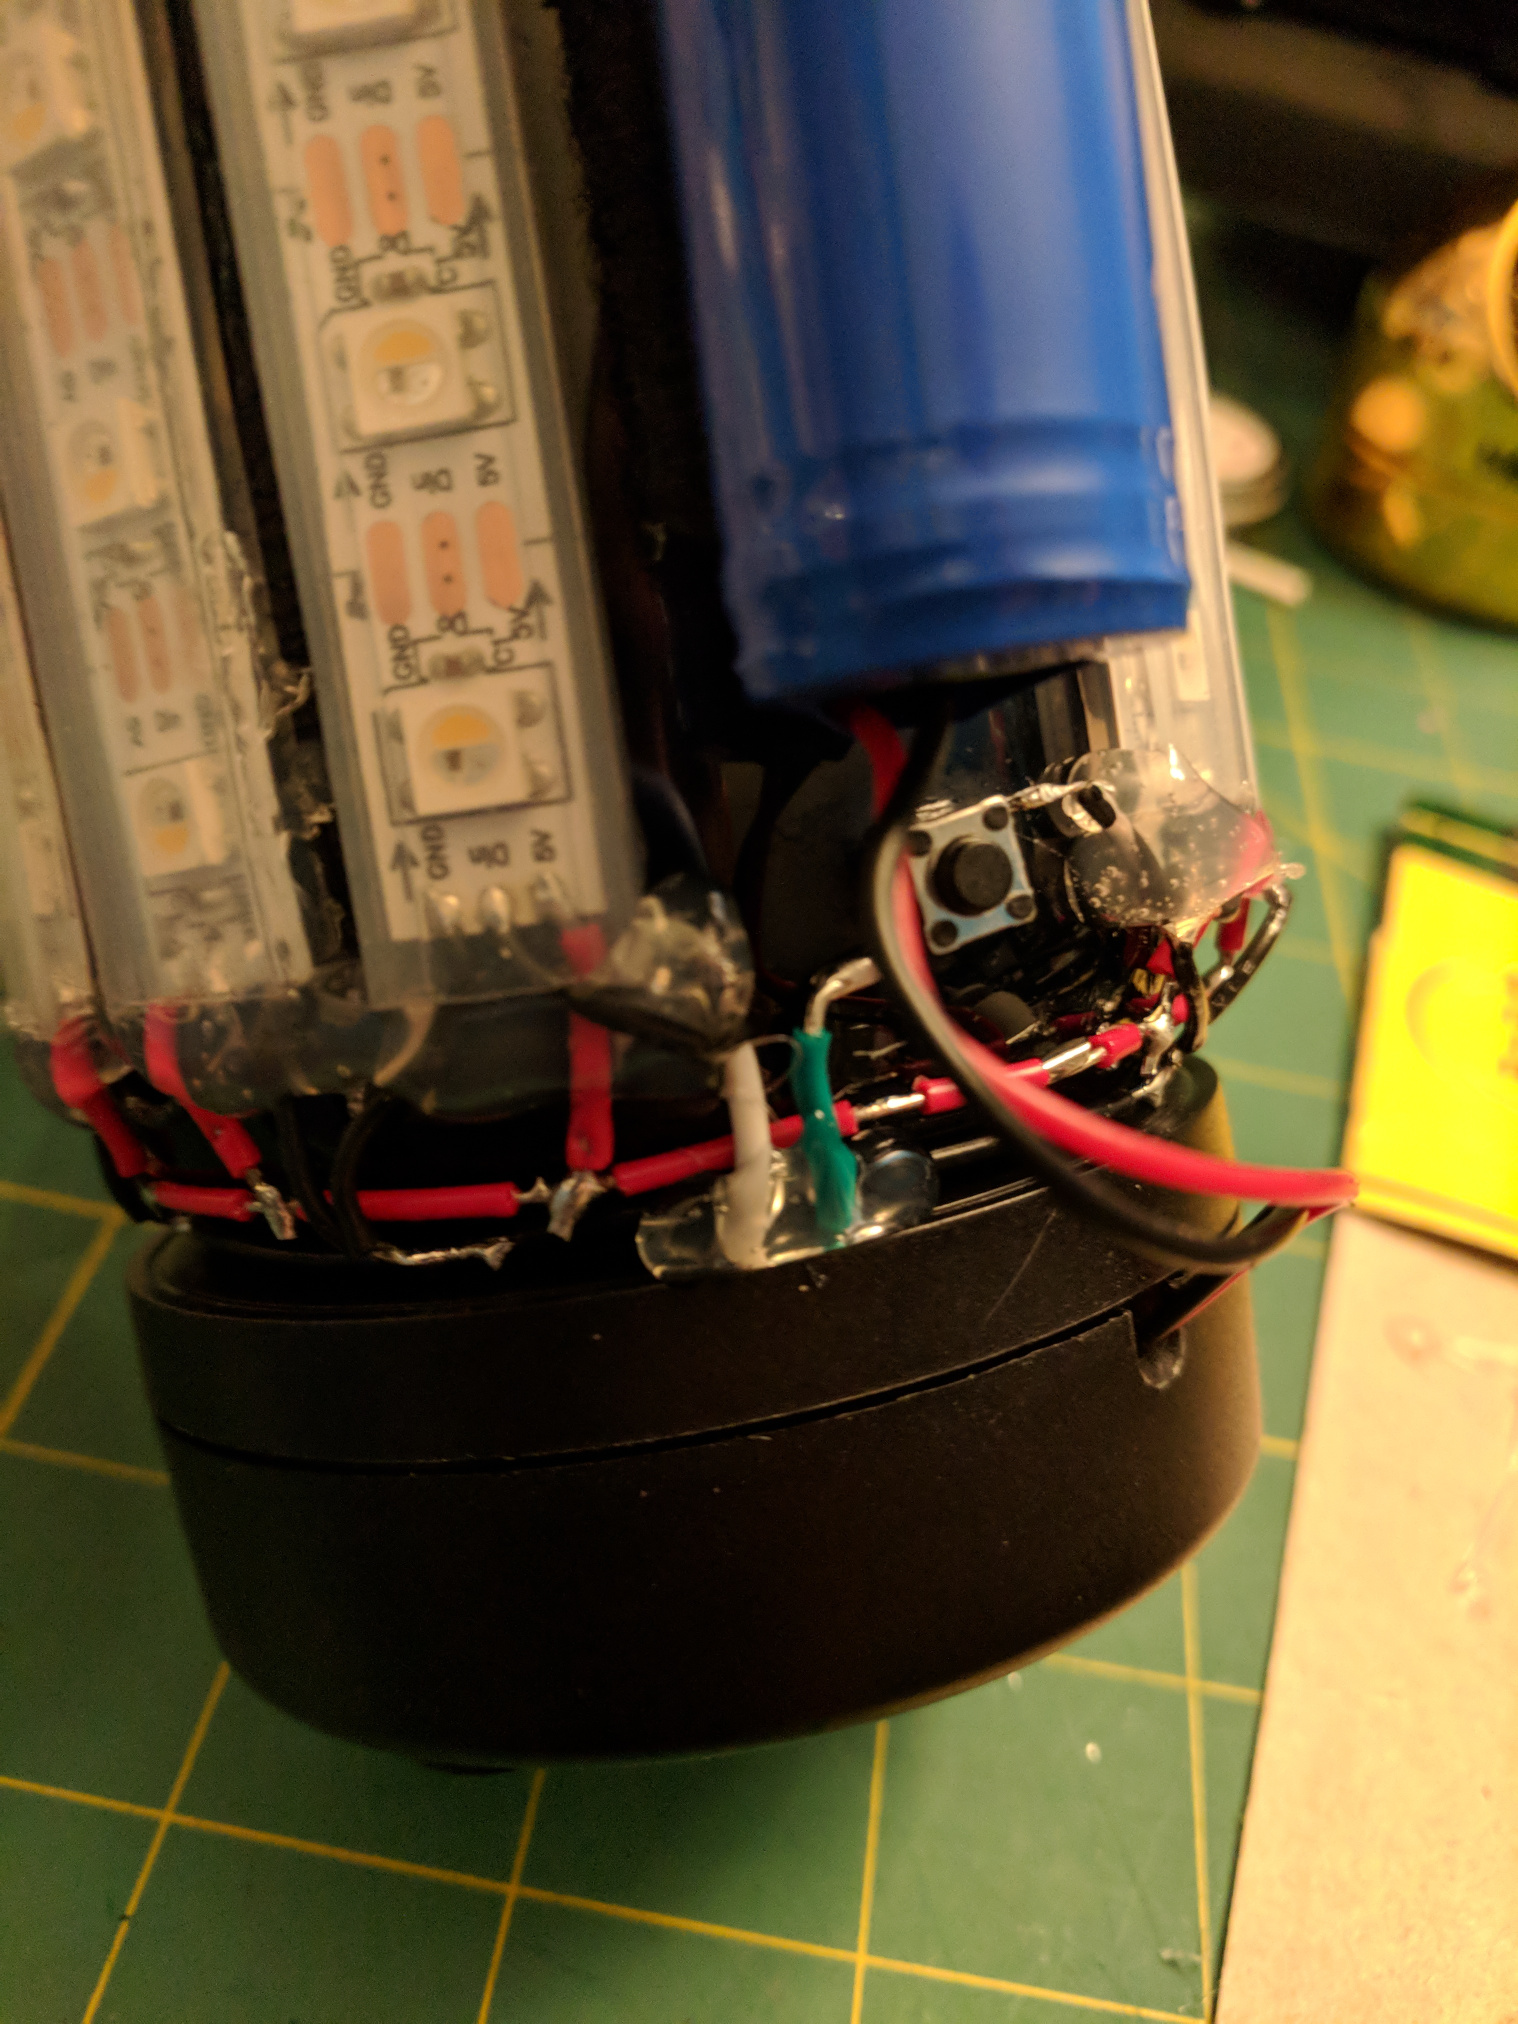 Close up of the bottom of the water bottle with the electonics enclosure mounted.